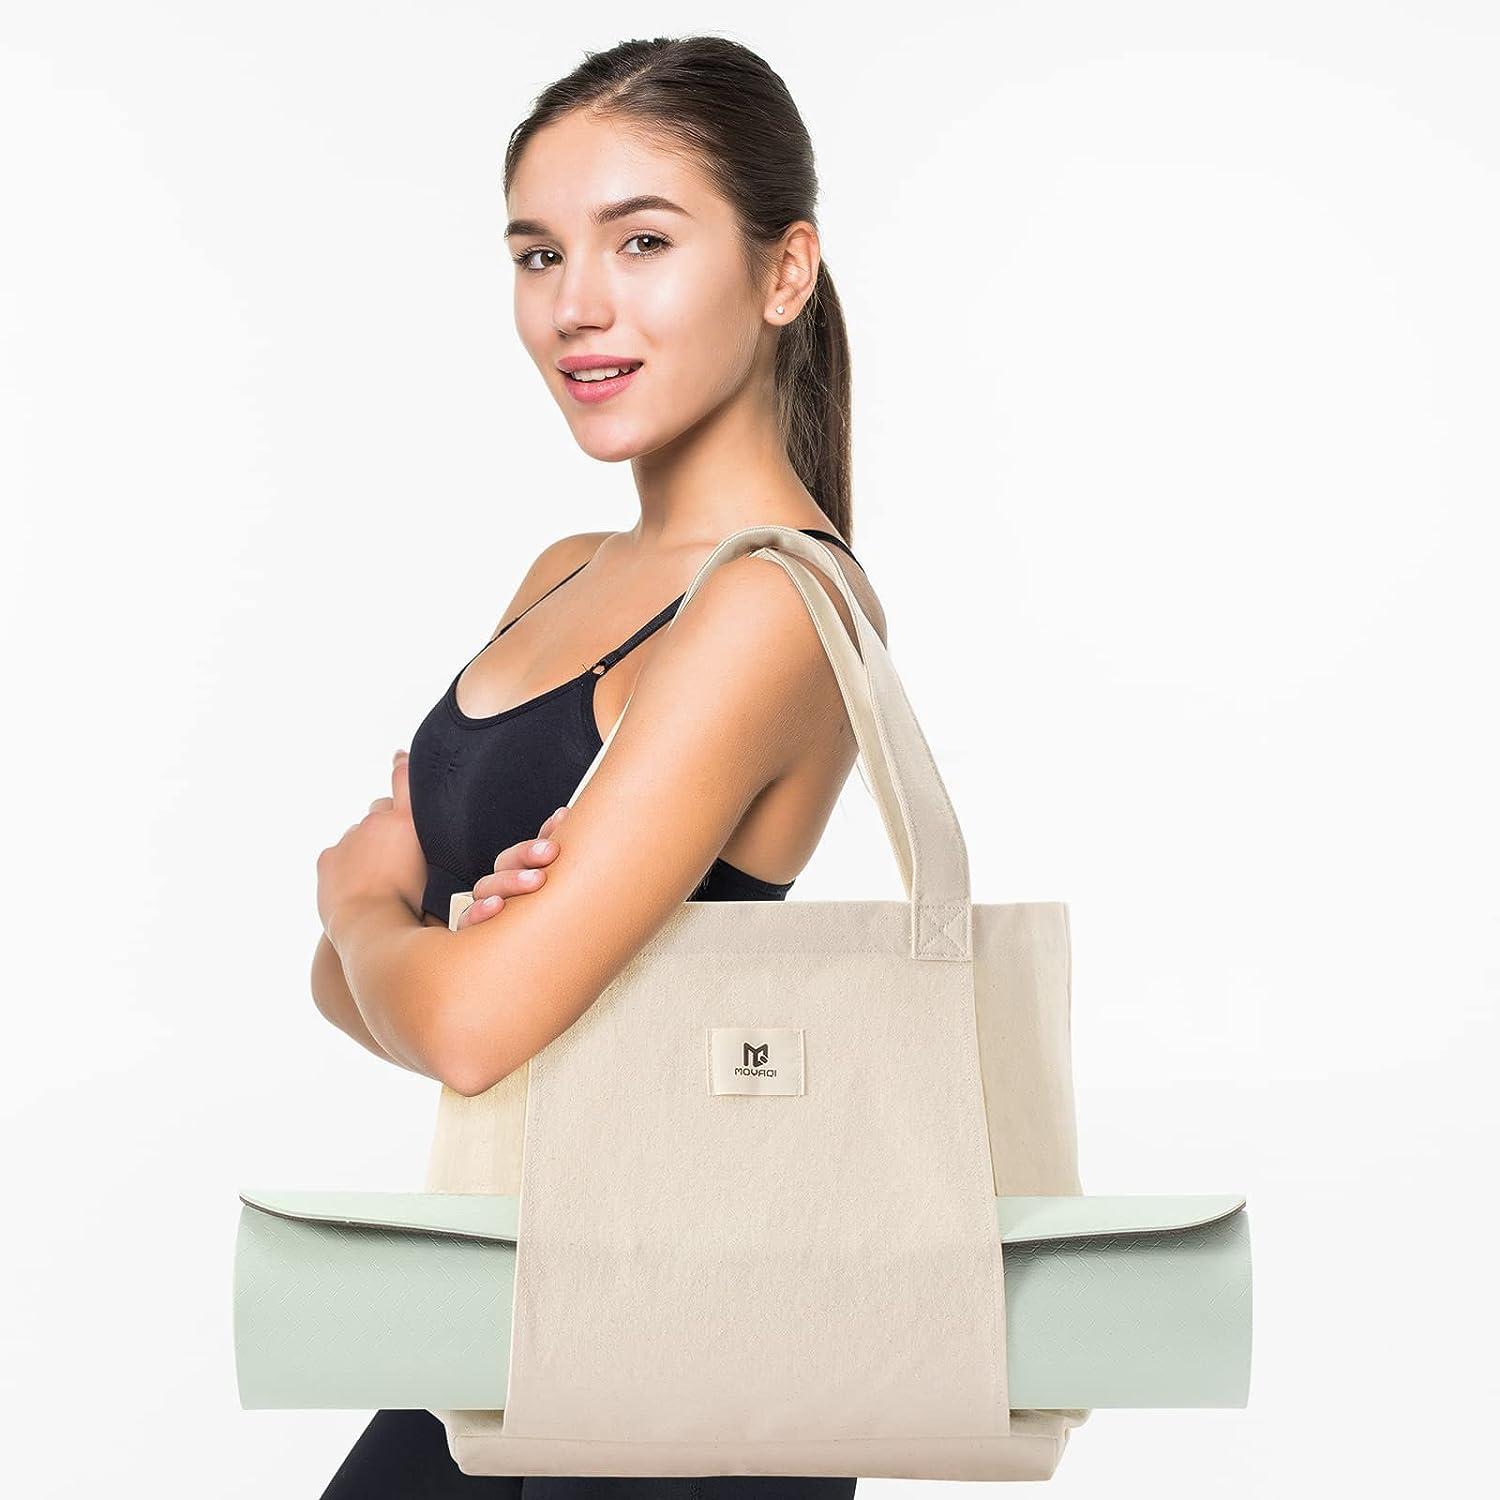 Moyaqi Canvas Tote Bag with Yoga Mat Carrier Pocket Carryall Shoulder Bag  for Office, Workout, Pilates, Travel, Beach and Gym Beige